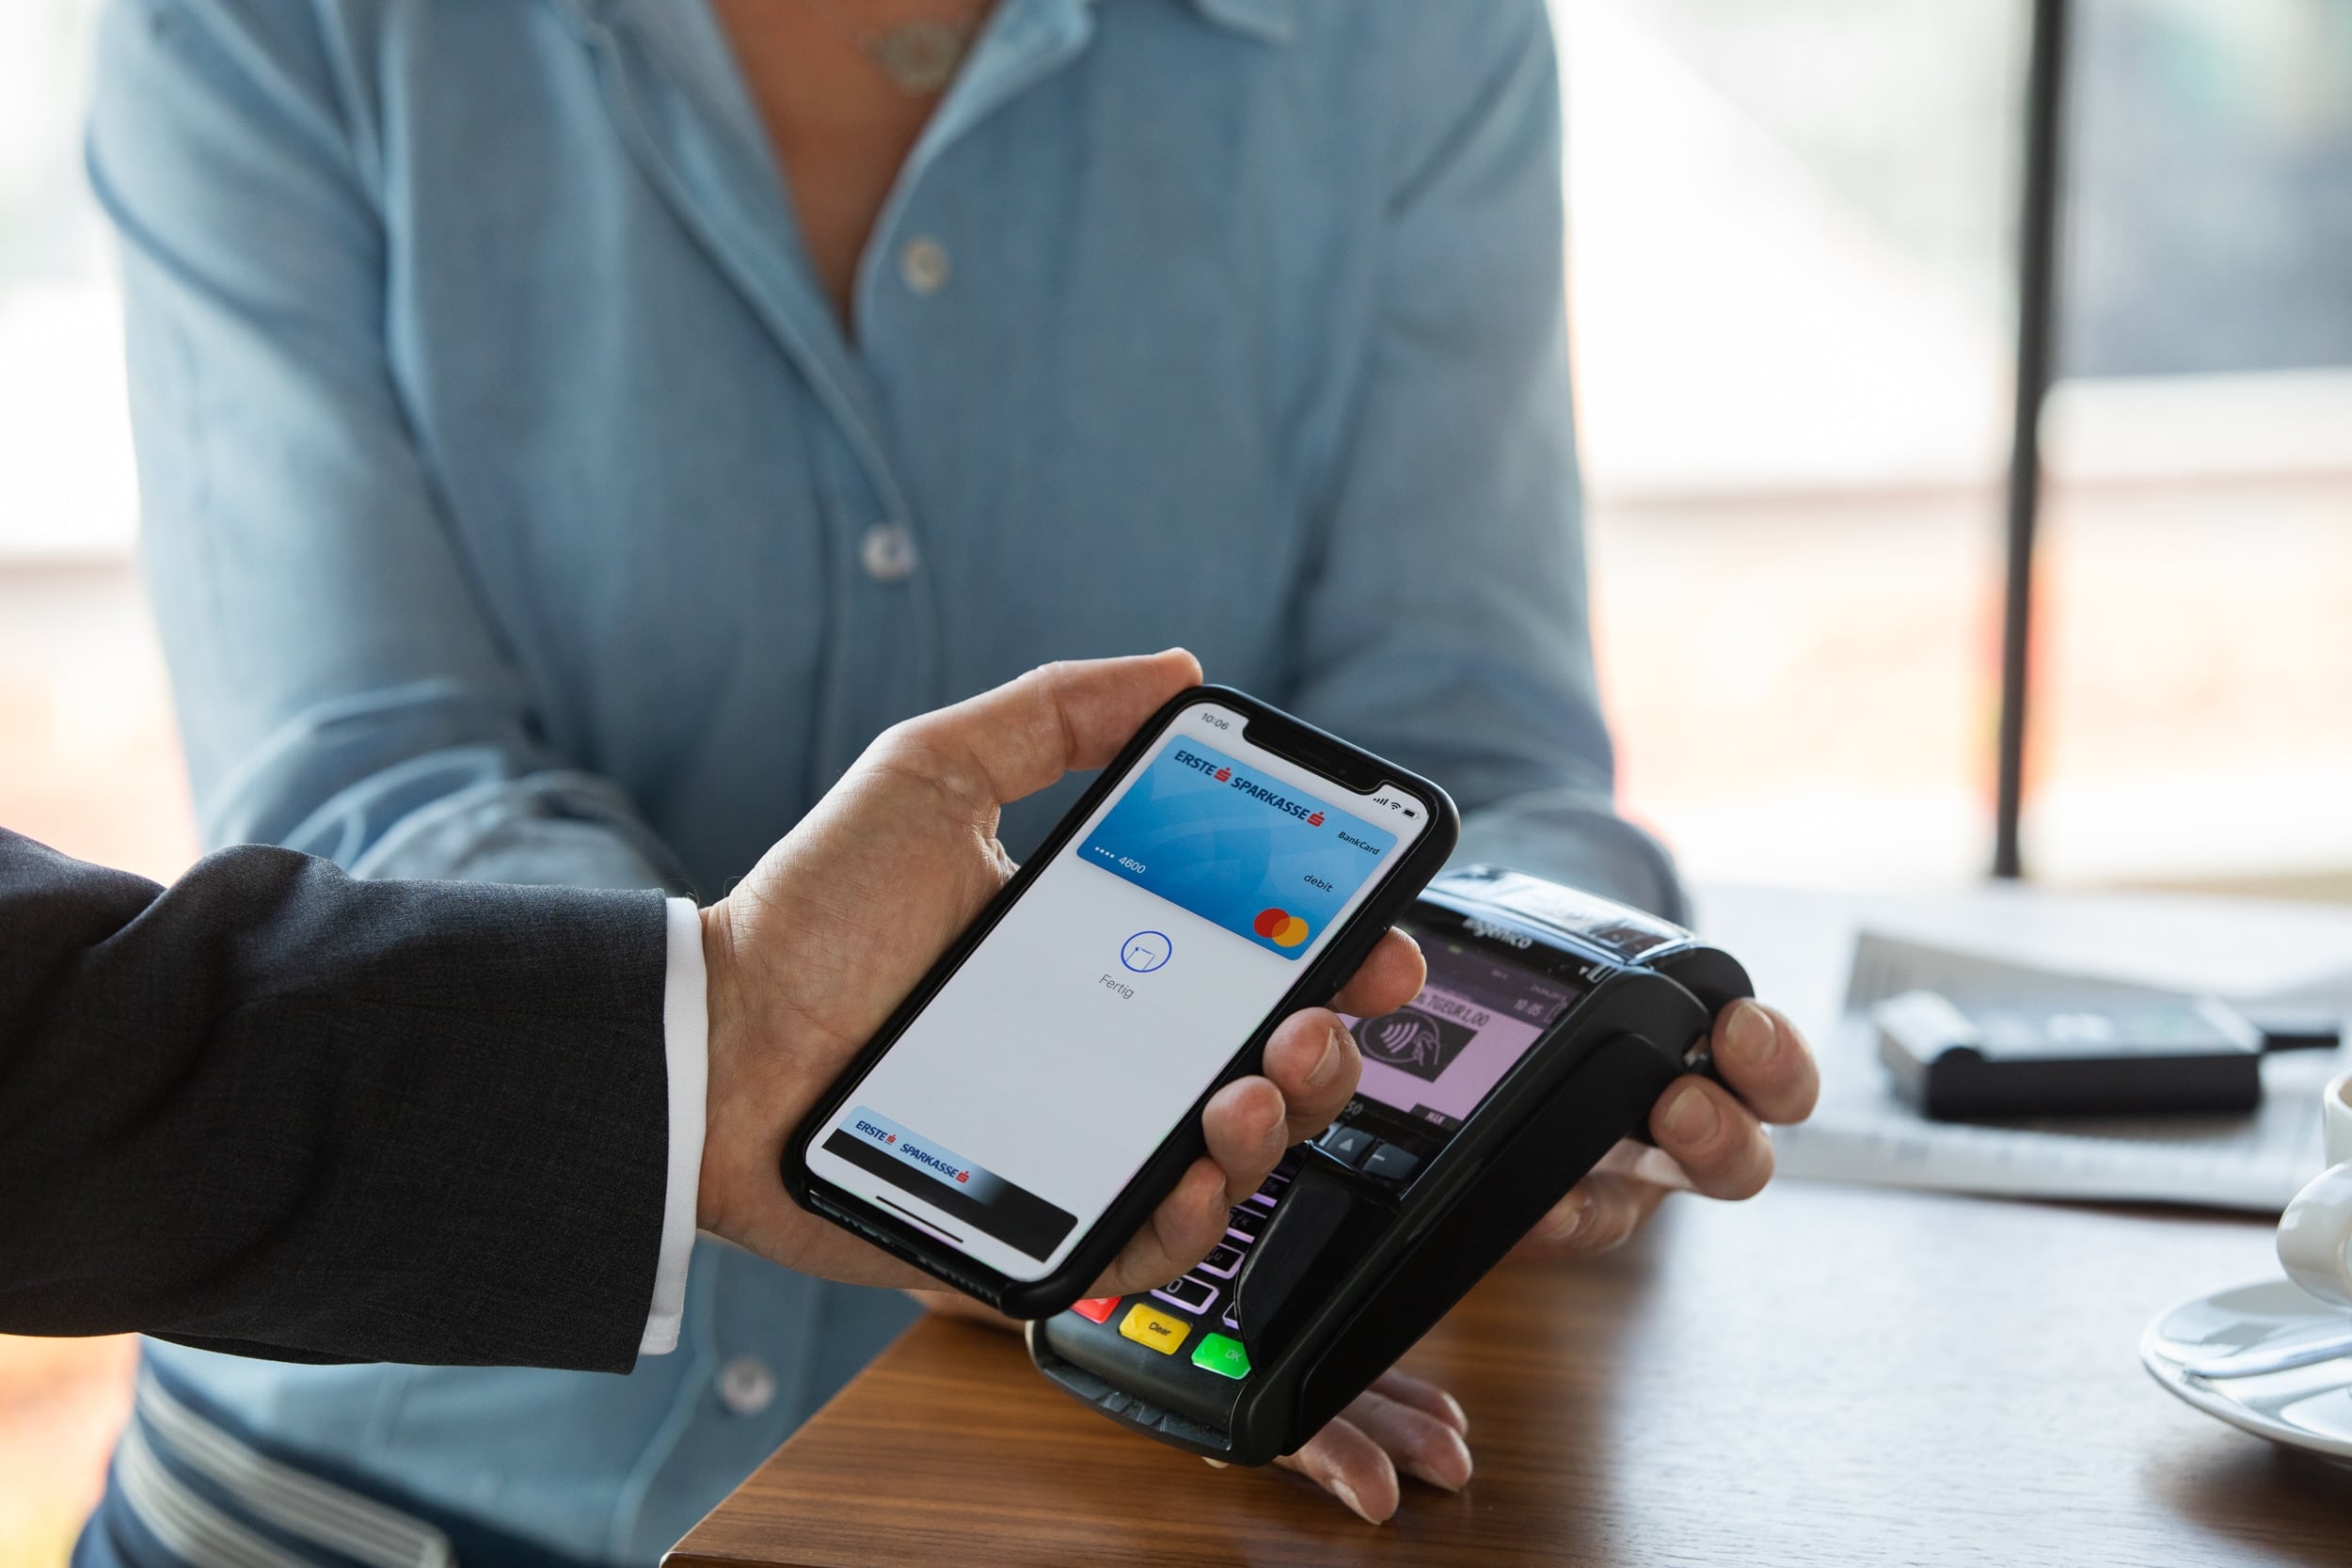 Apple sees "potential" in cryptocurrencies and wants Apple Pay more skilled at tips